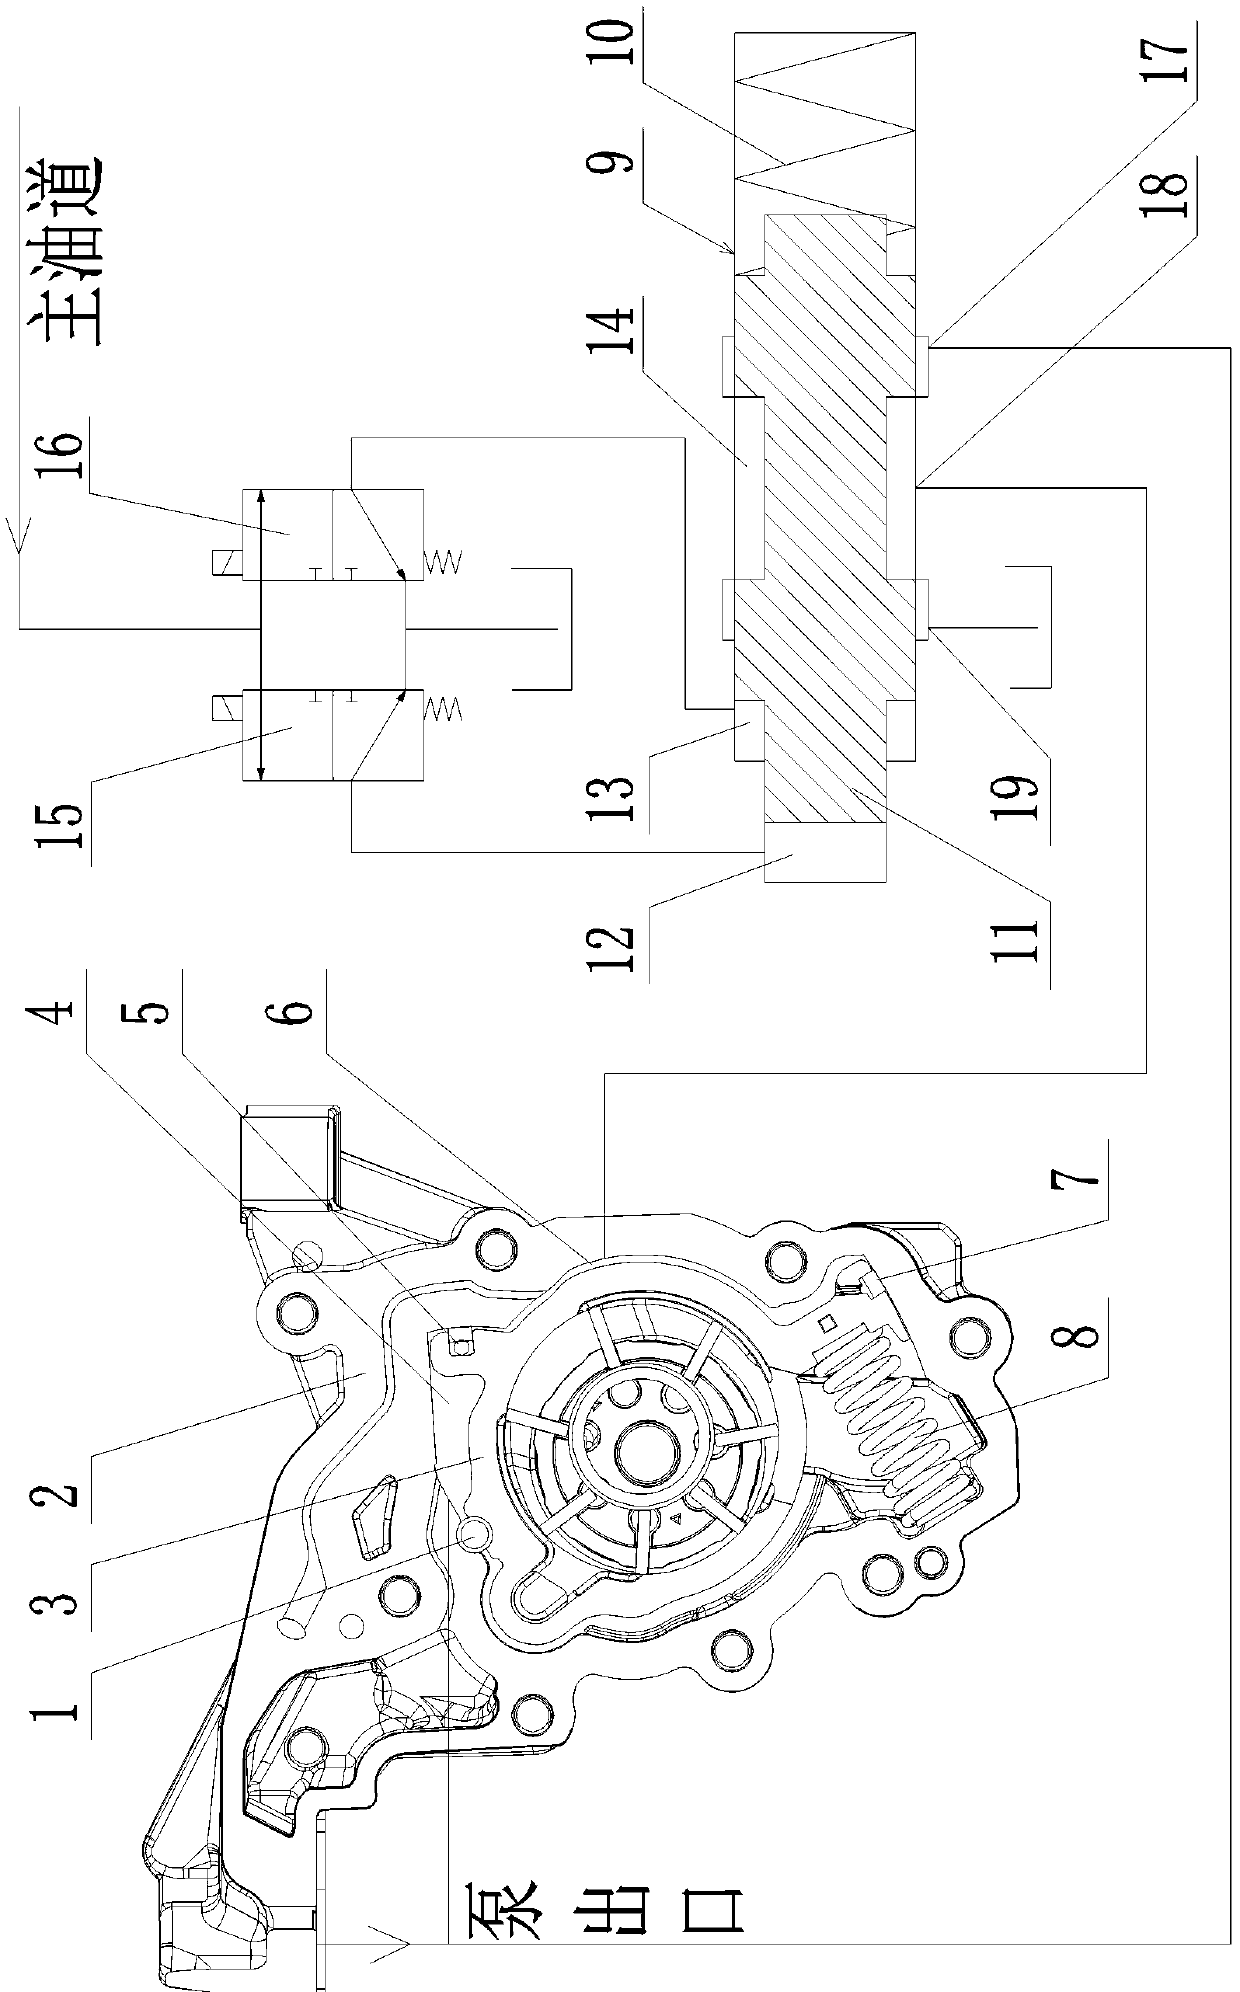 Three-level or four-level variable displacement machine oil pump based on double electromagnetic valves